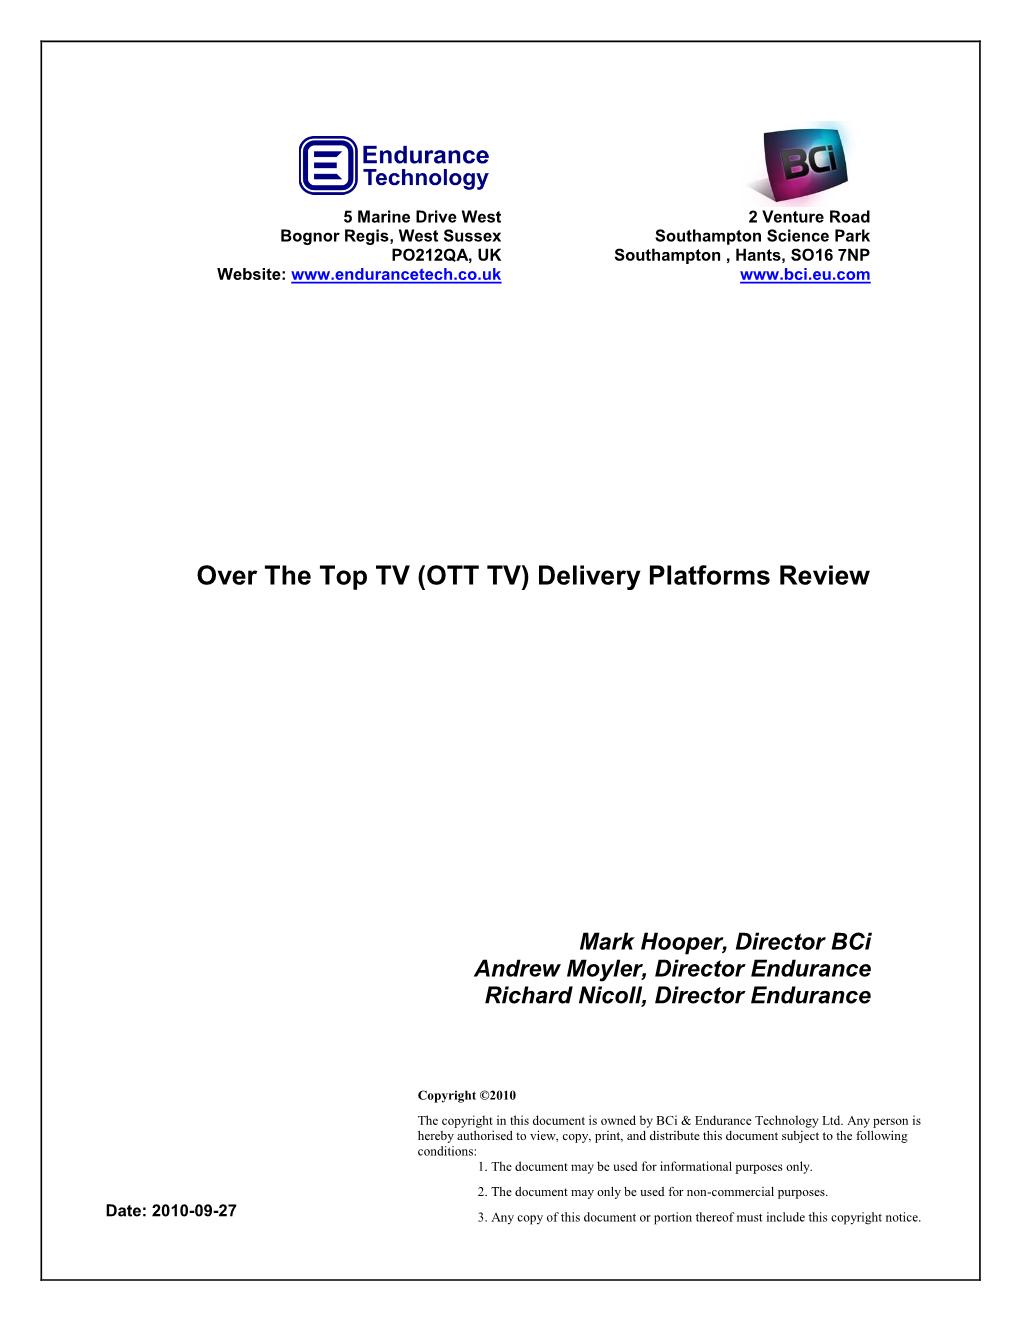 OTT TV) Delivery Platforms Review